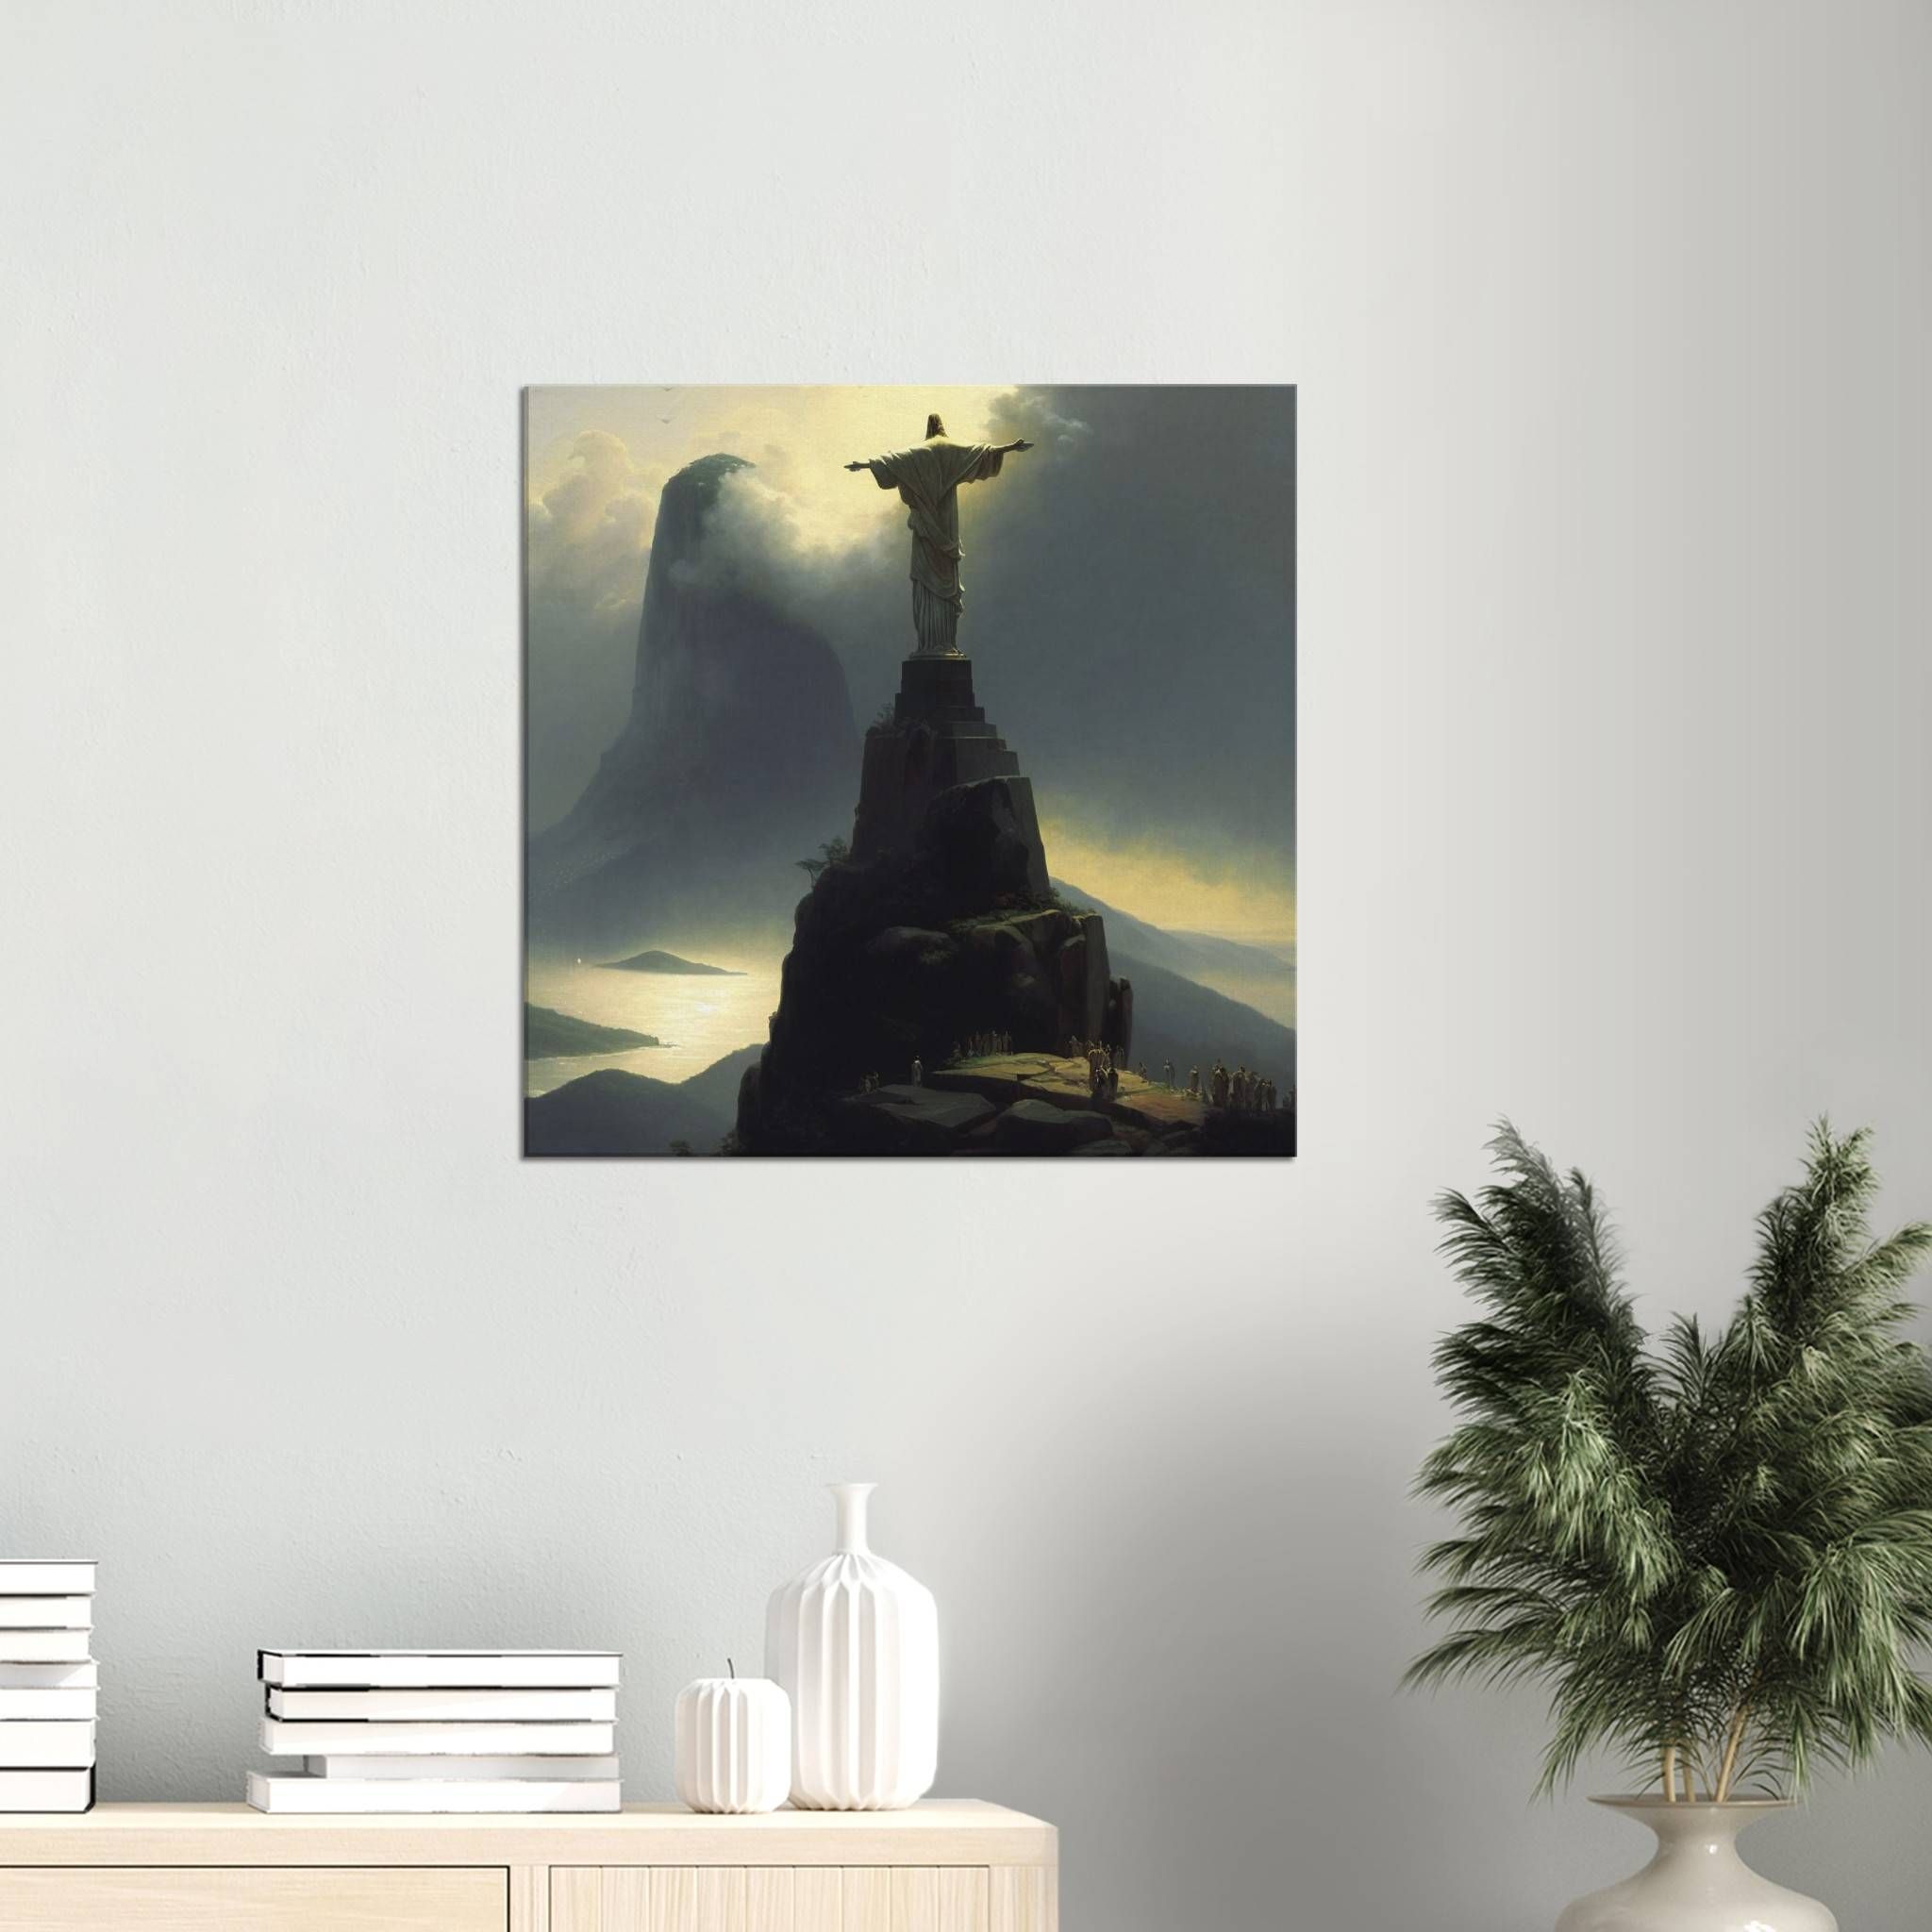 Christ the Redeemer 3 / 60 x 60cm (Canvas Print) Canvas Print Canvas reproduction The Pianist Print On Demand Fabled Gallery https://fabledgallery.art/product/chris-redentor-3/